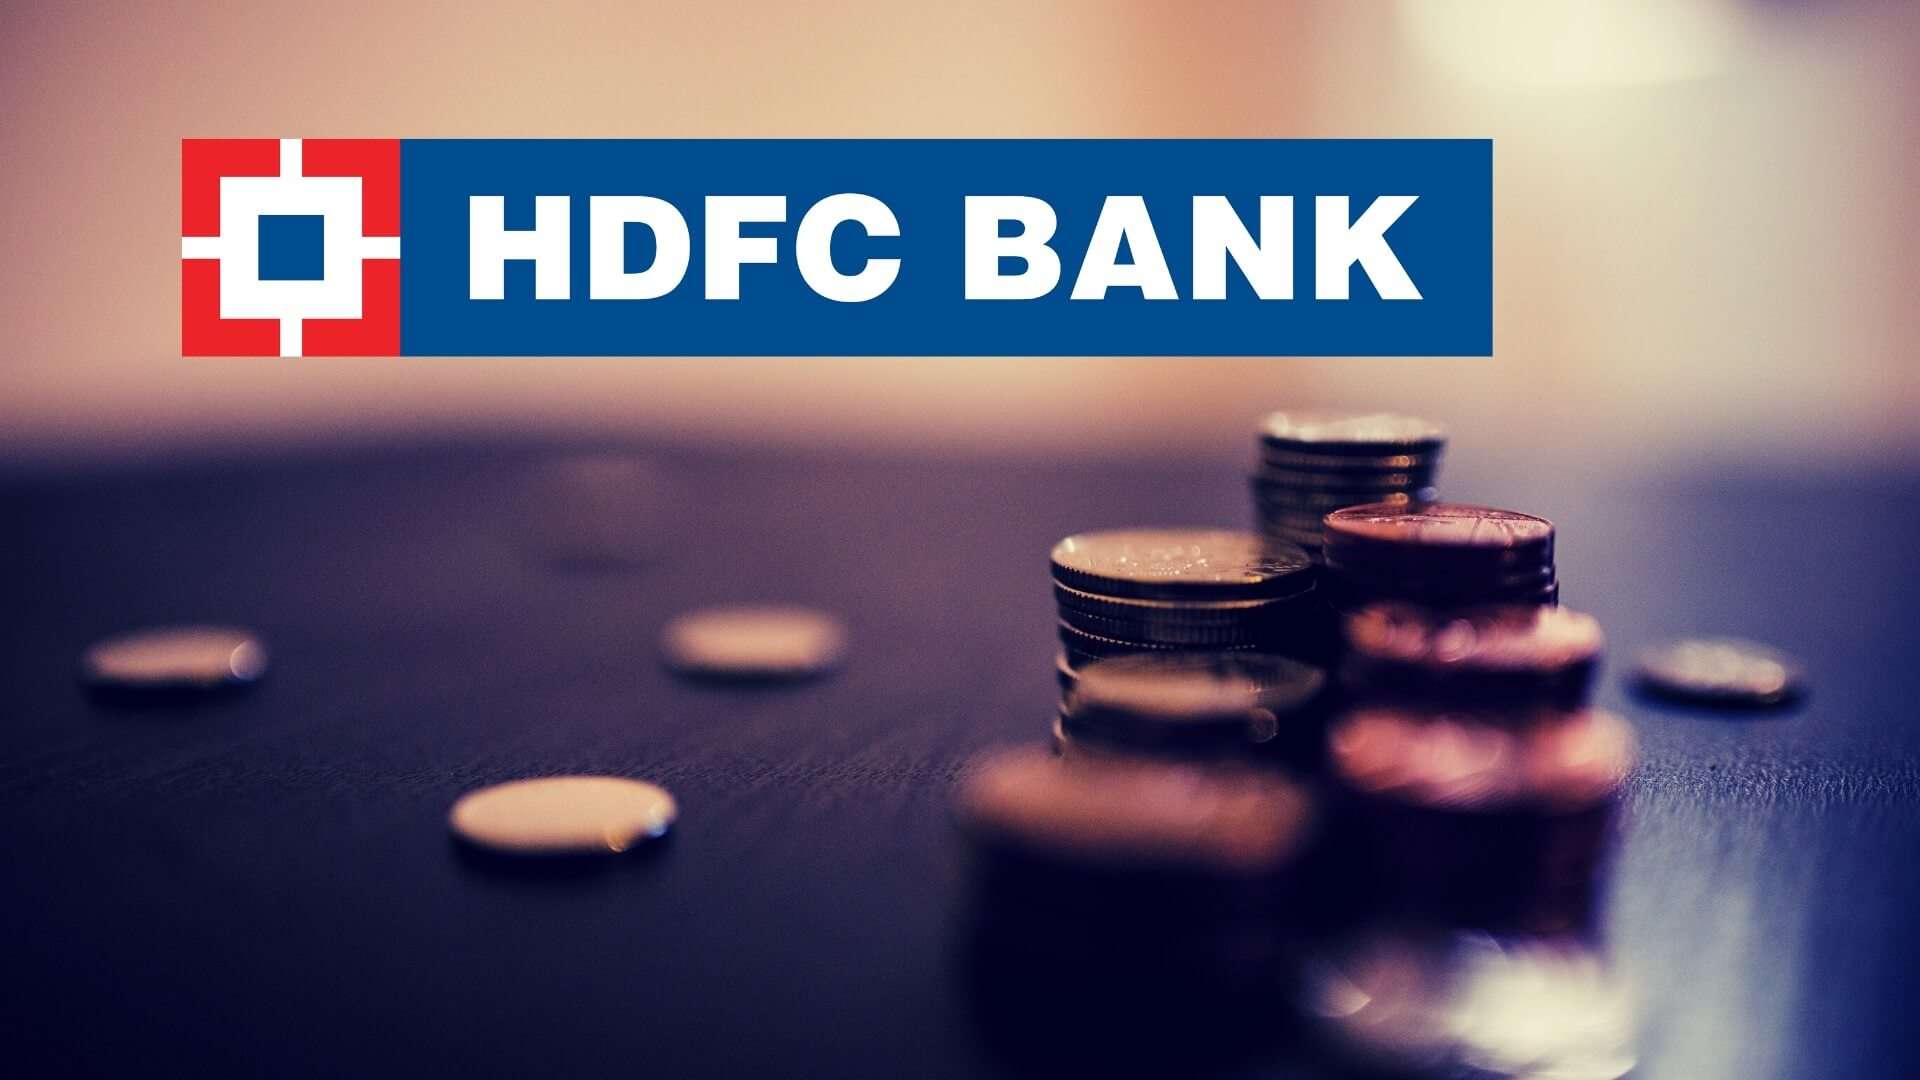 HDFC ; Under This Deal, HDFC Will Have 41% Stake In HDFC Bank